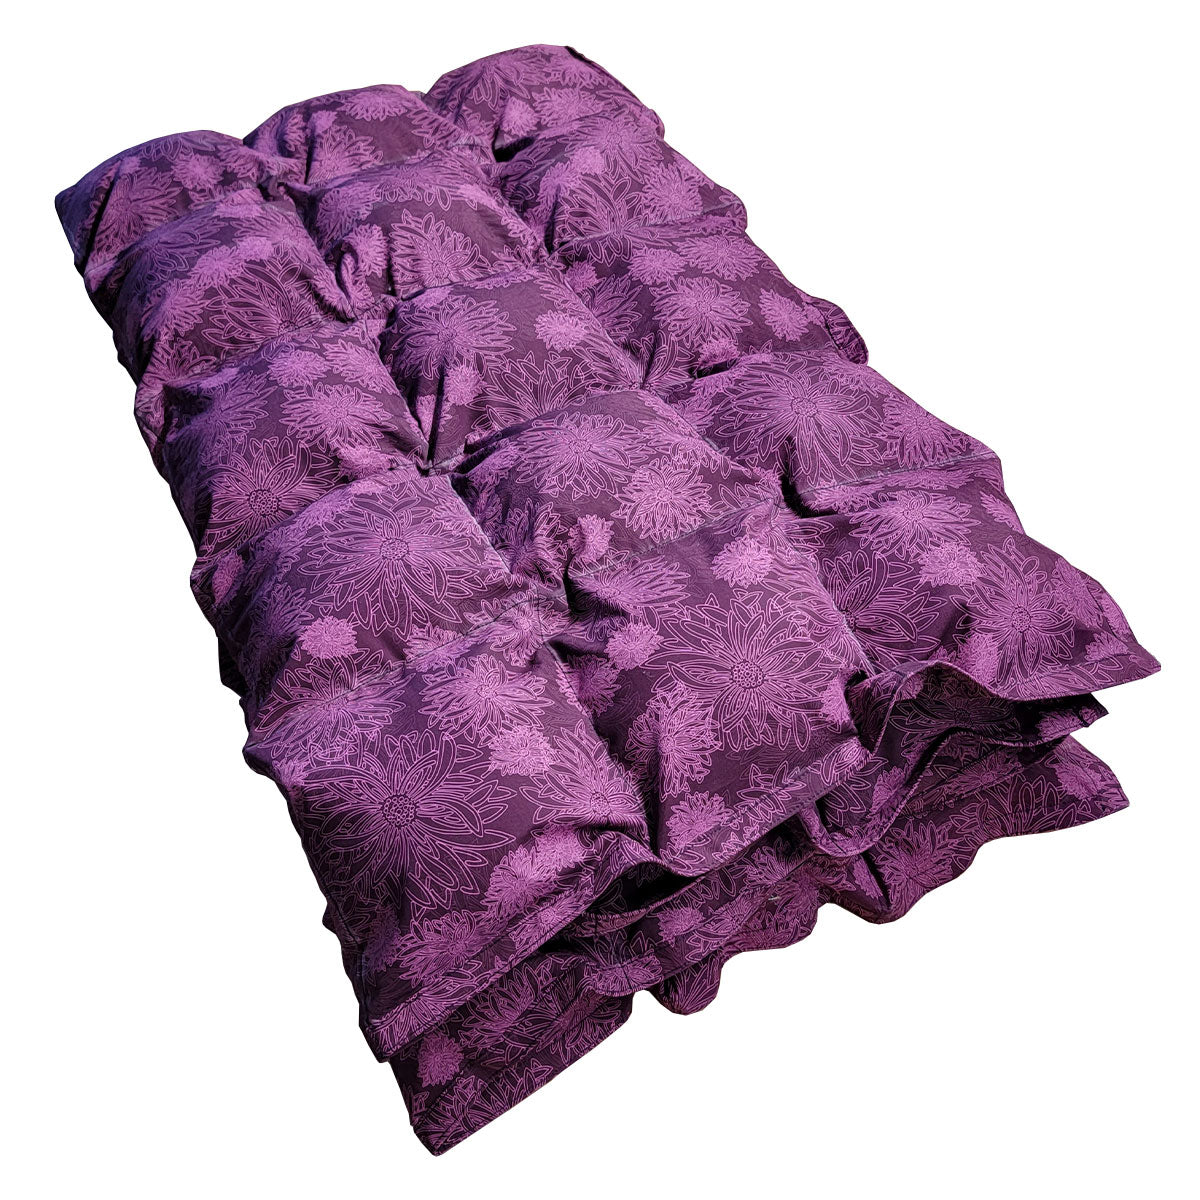 Clearance Weighted Blanket - Medium 9 lb Floral Plum (for 70 lb user)